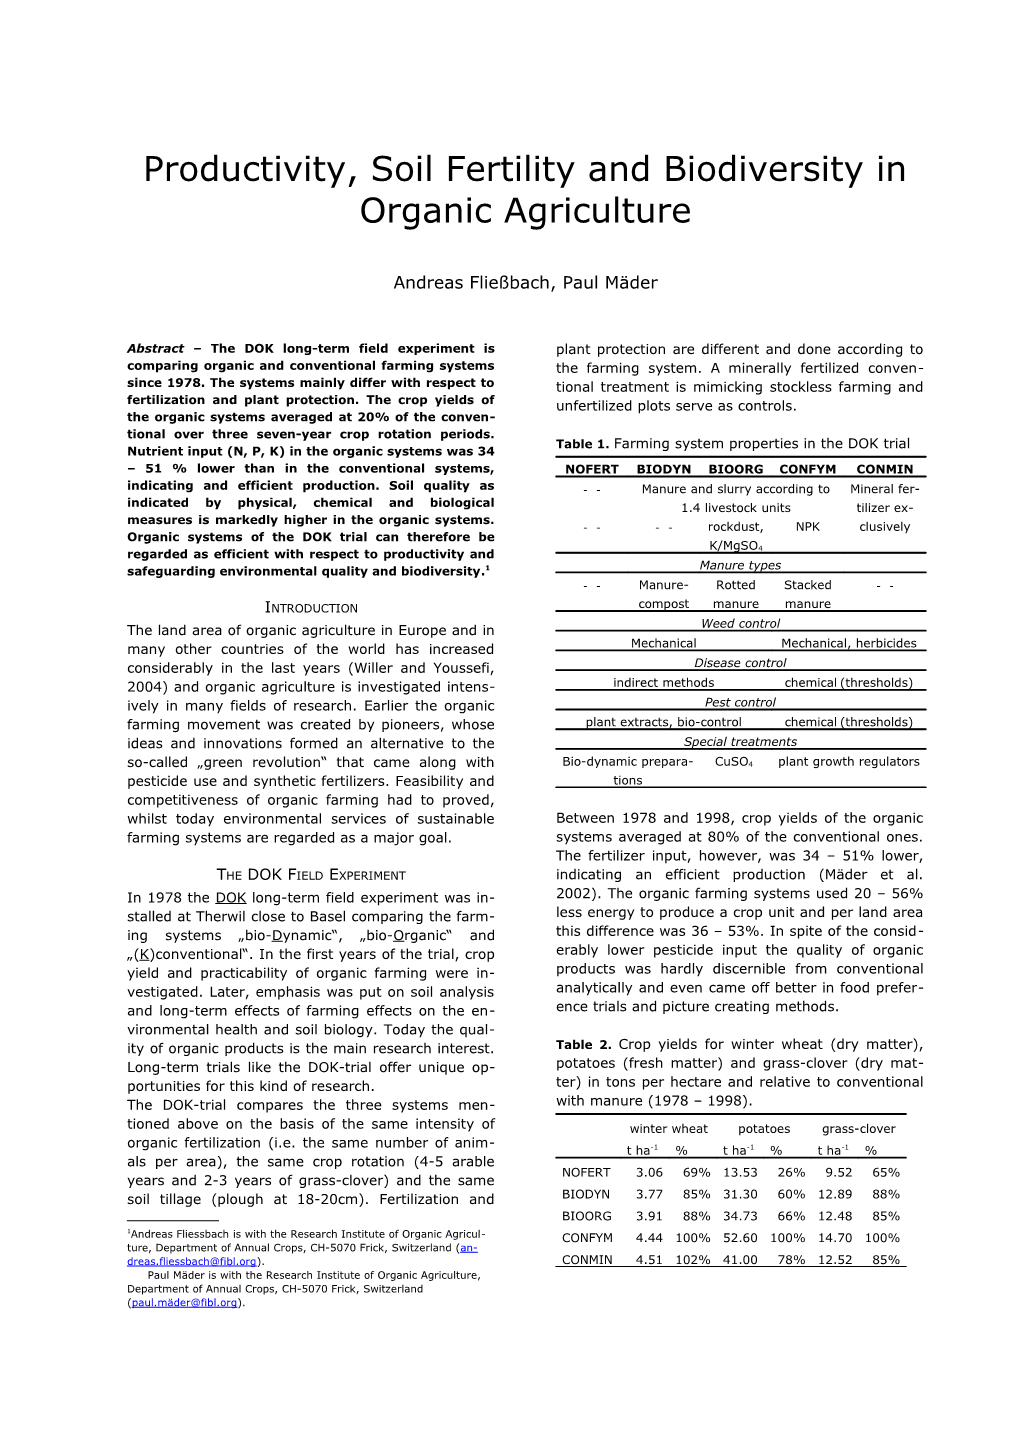 Preparation and Submission of Extended Ab-Stracts for the Joint Organic Congress 2006 s1